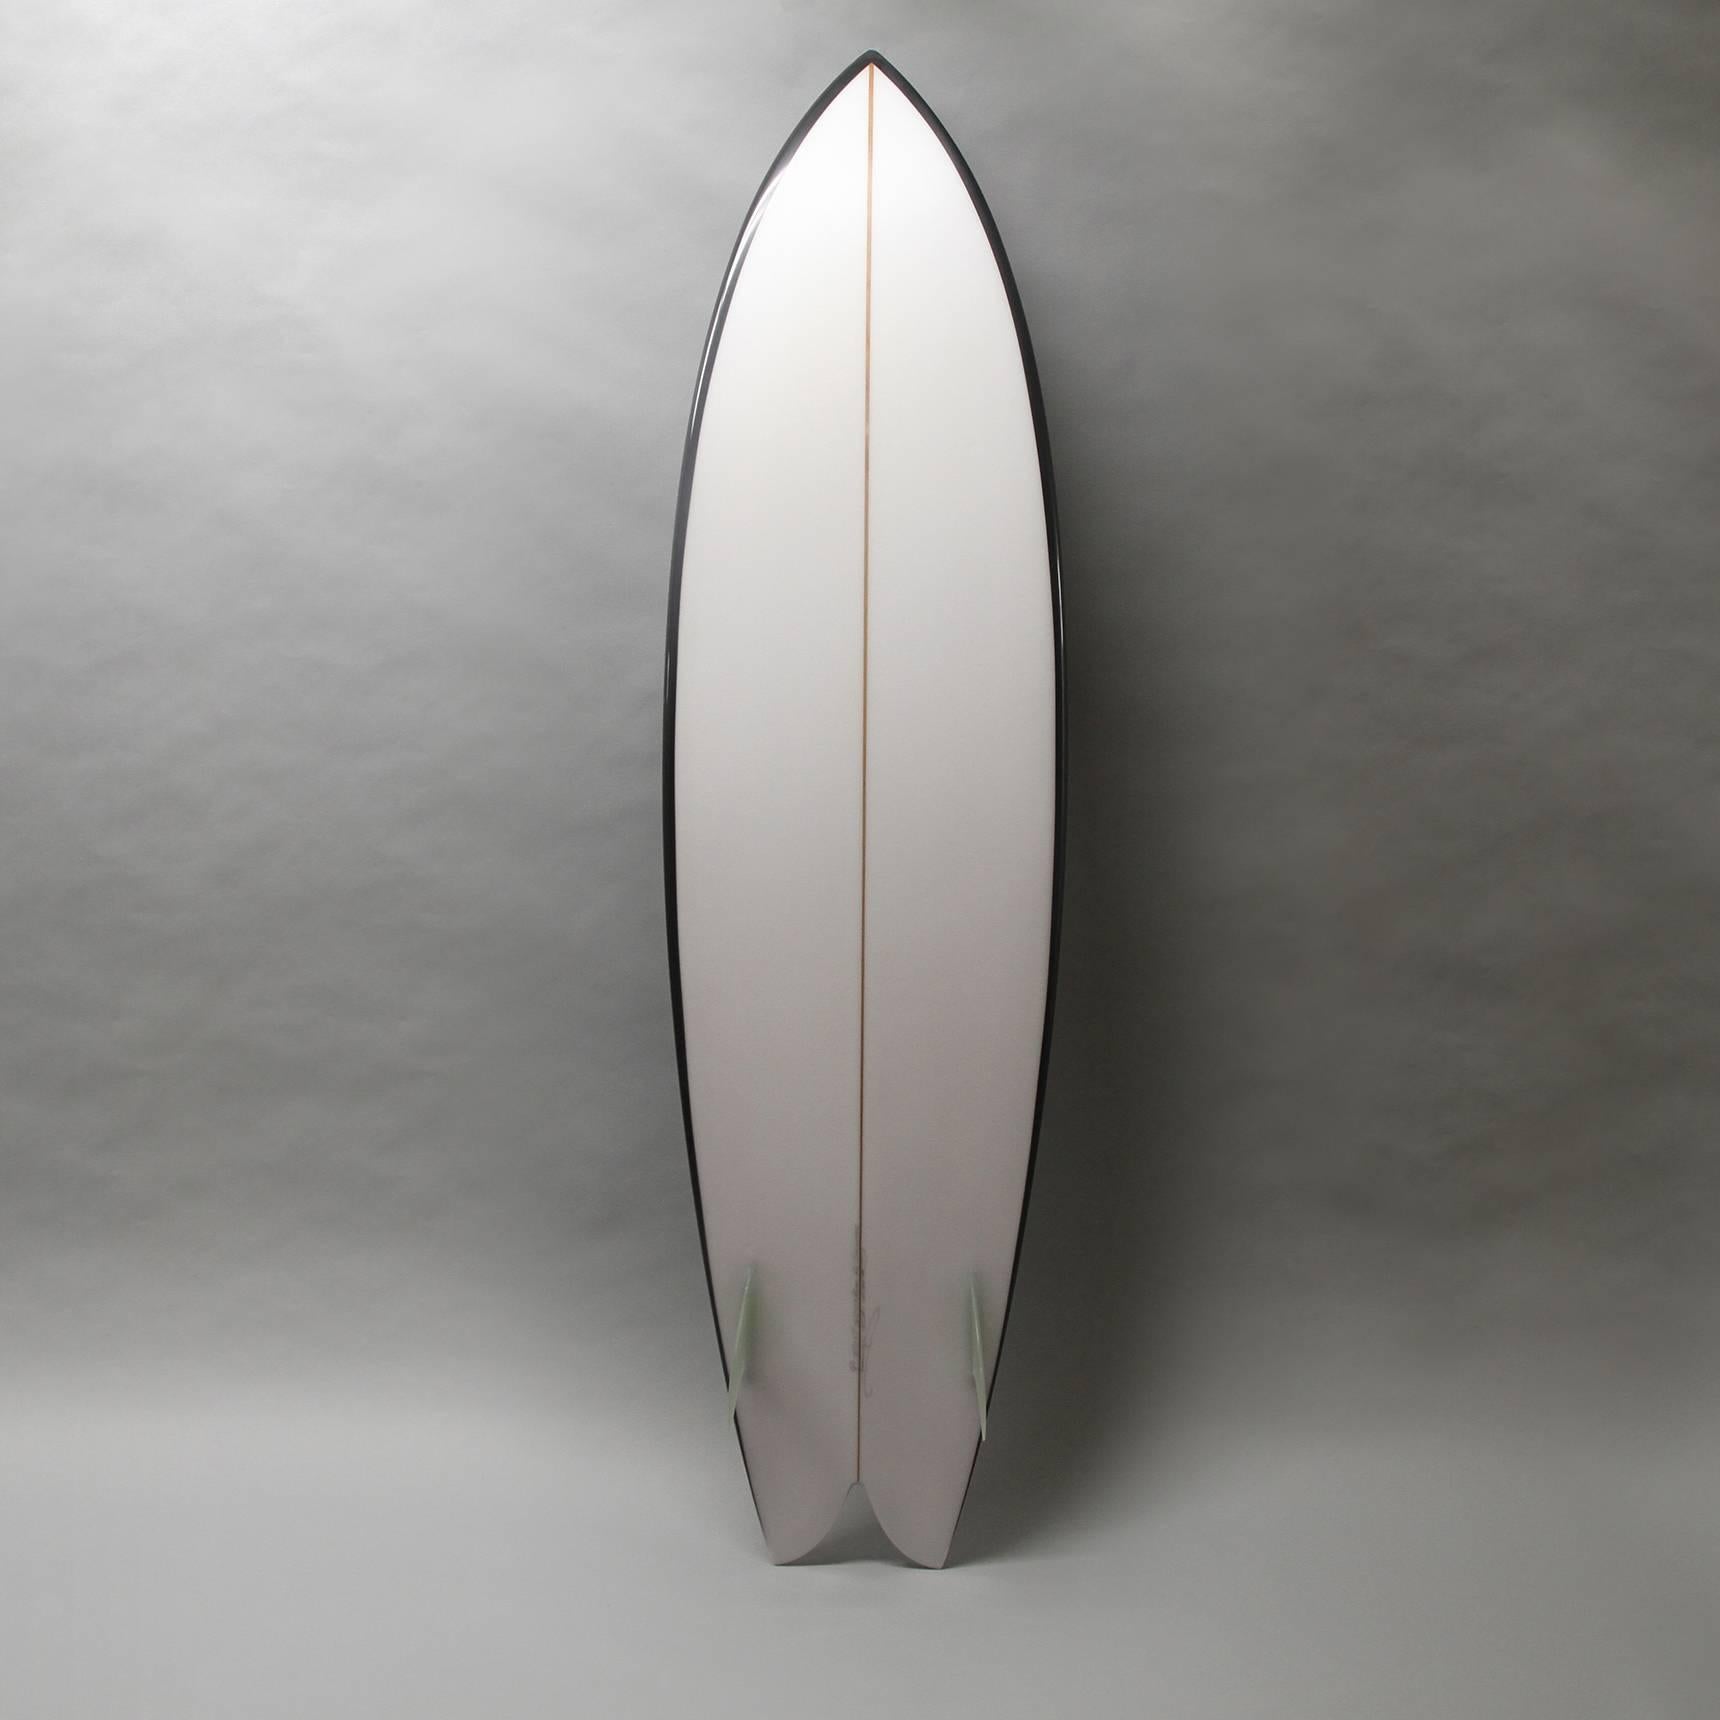 This custom board was inspired by Ellsworth Kelly's Dazzle war ships and will add a bit of socal to any room. It is an actual board designed with Chris Christensen and can be used for surfing, yet I see it as a sculpture to team against a wall or